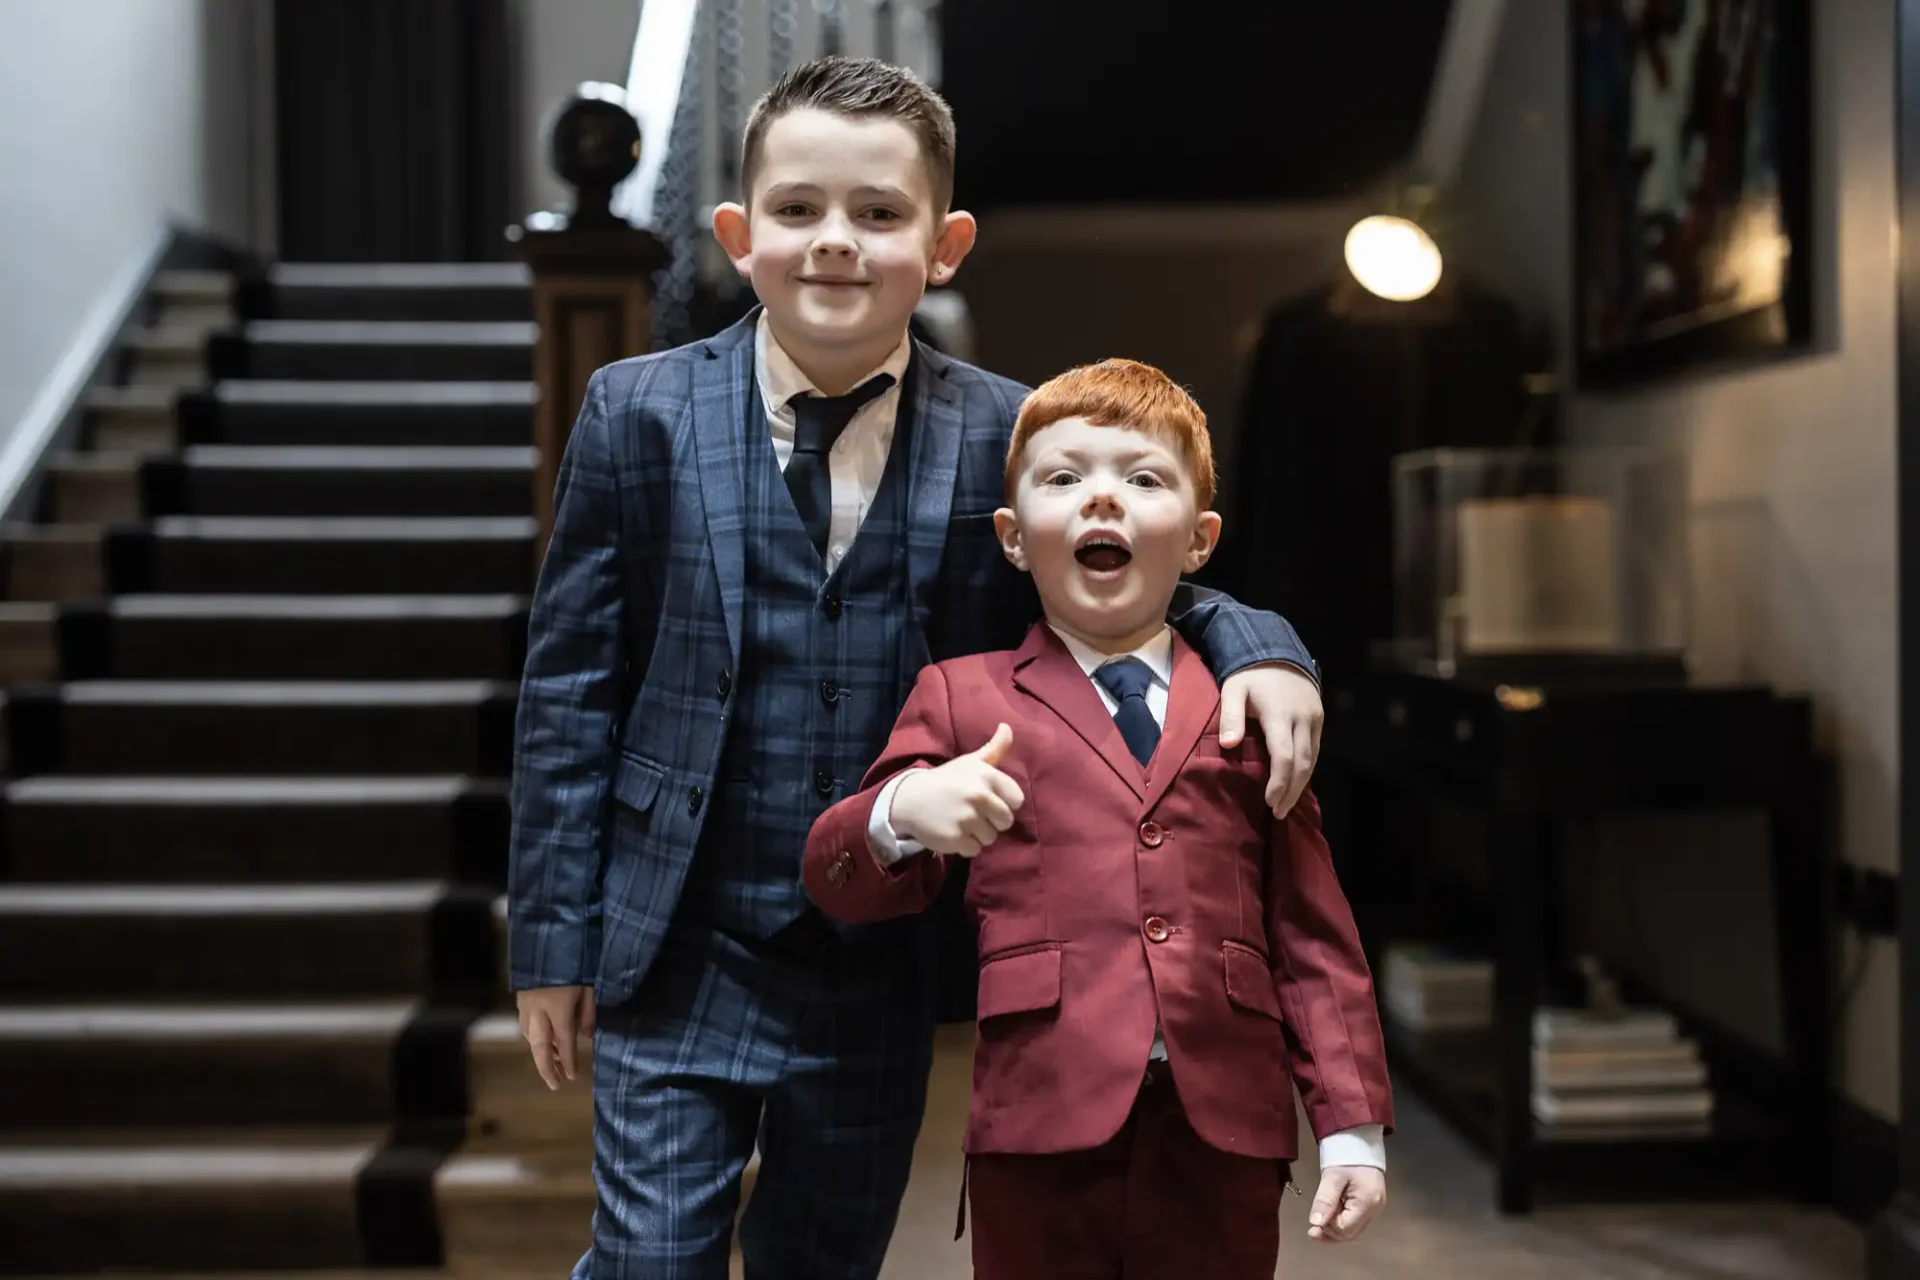 Two young boys in formal suits smiling and posing indoors, with one giving a thumbs-up.